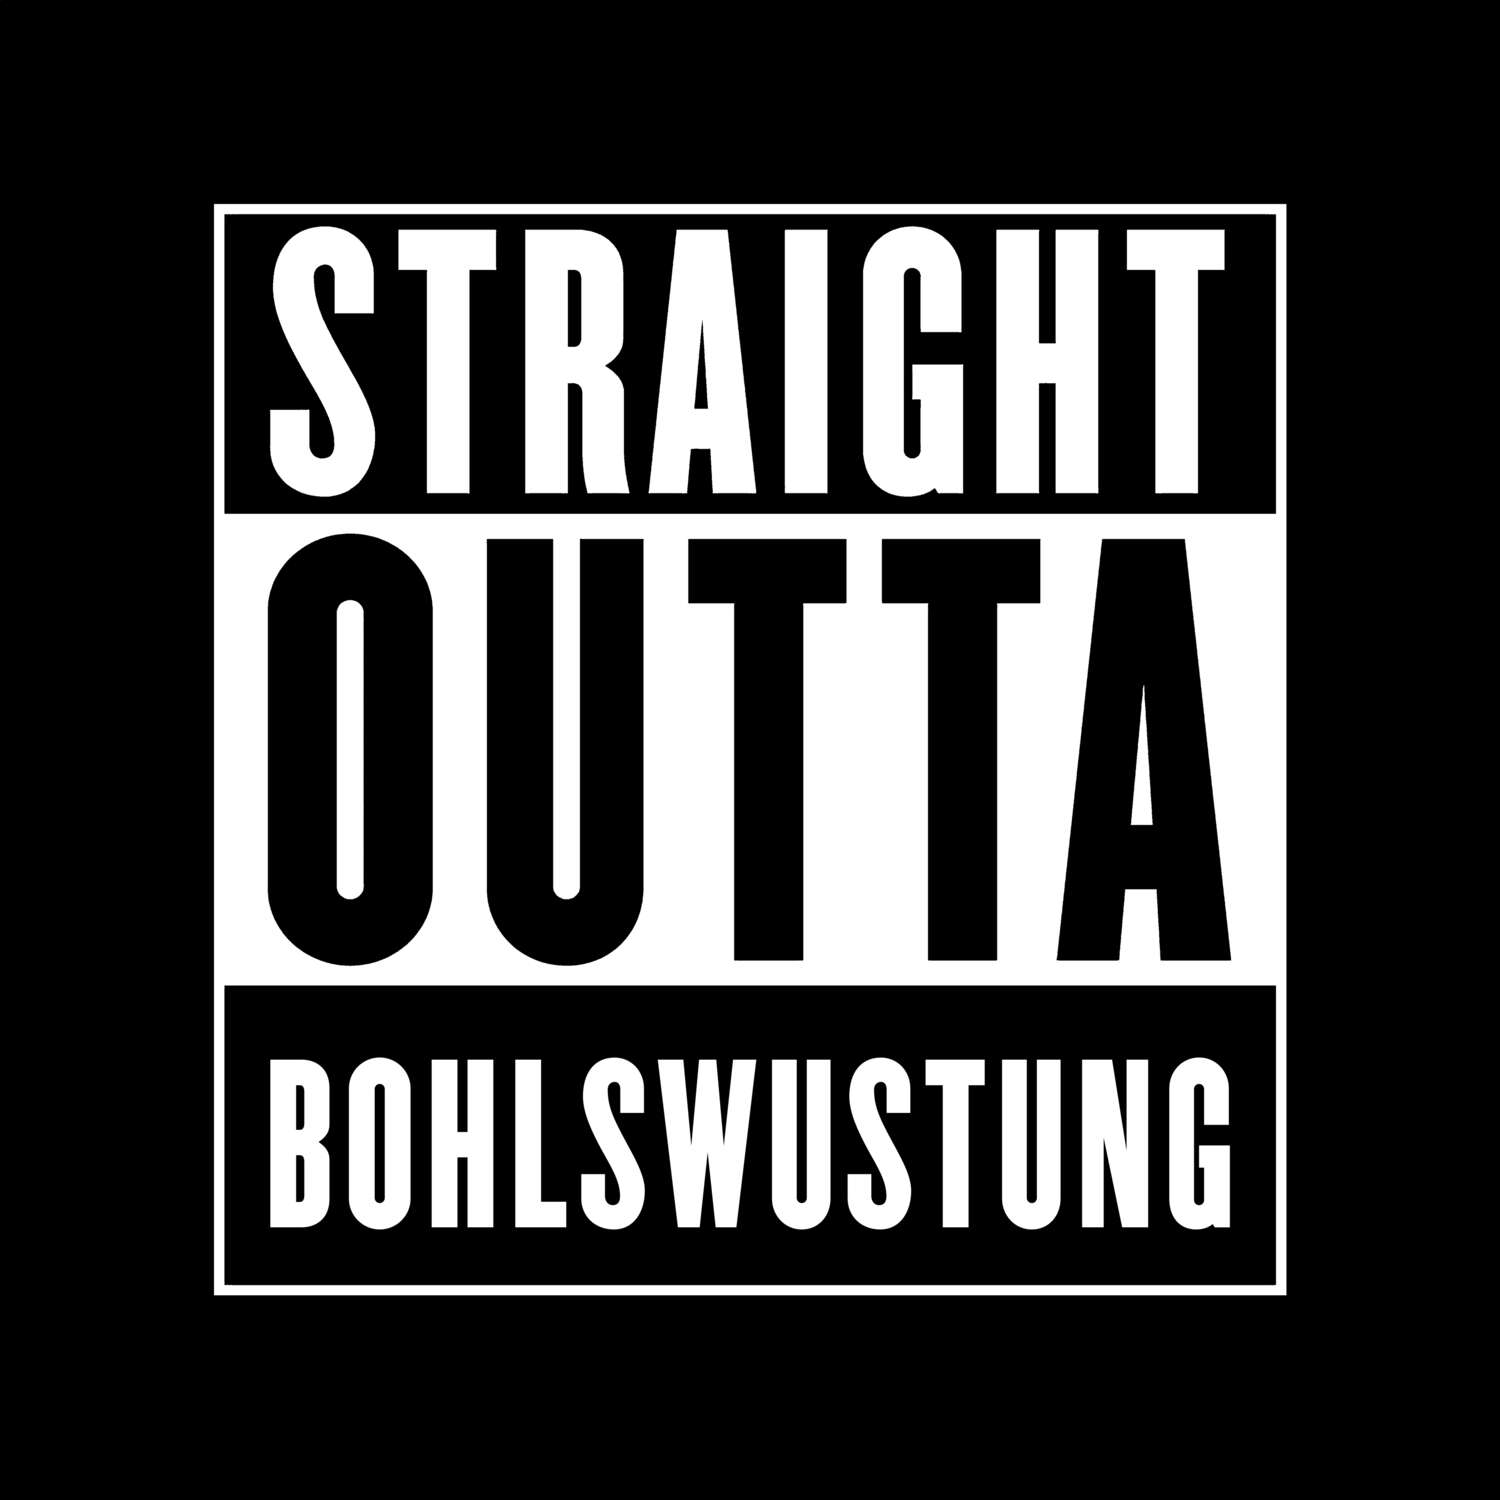 Bohlswustung T-Shirt »Straight Outta«